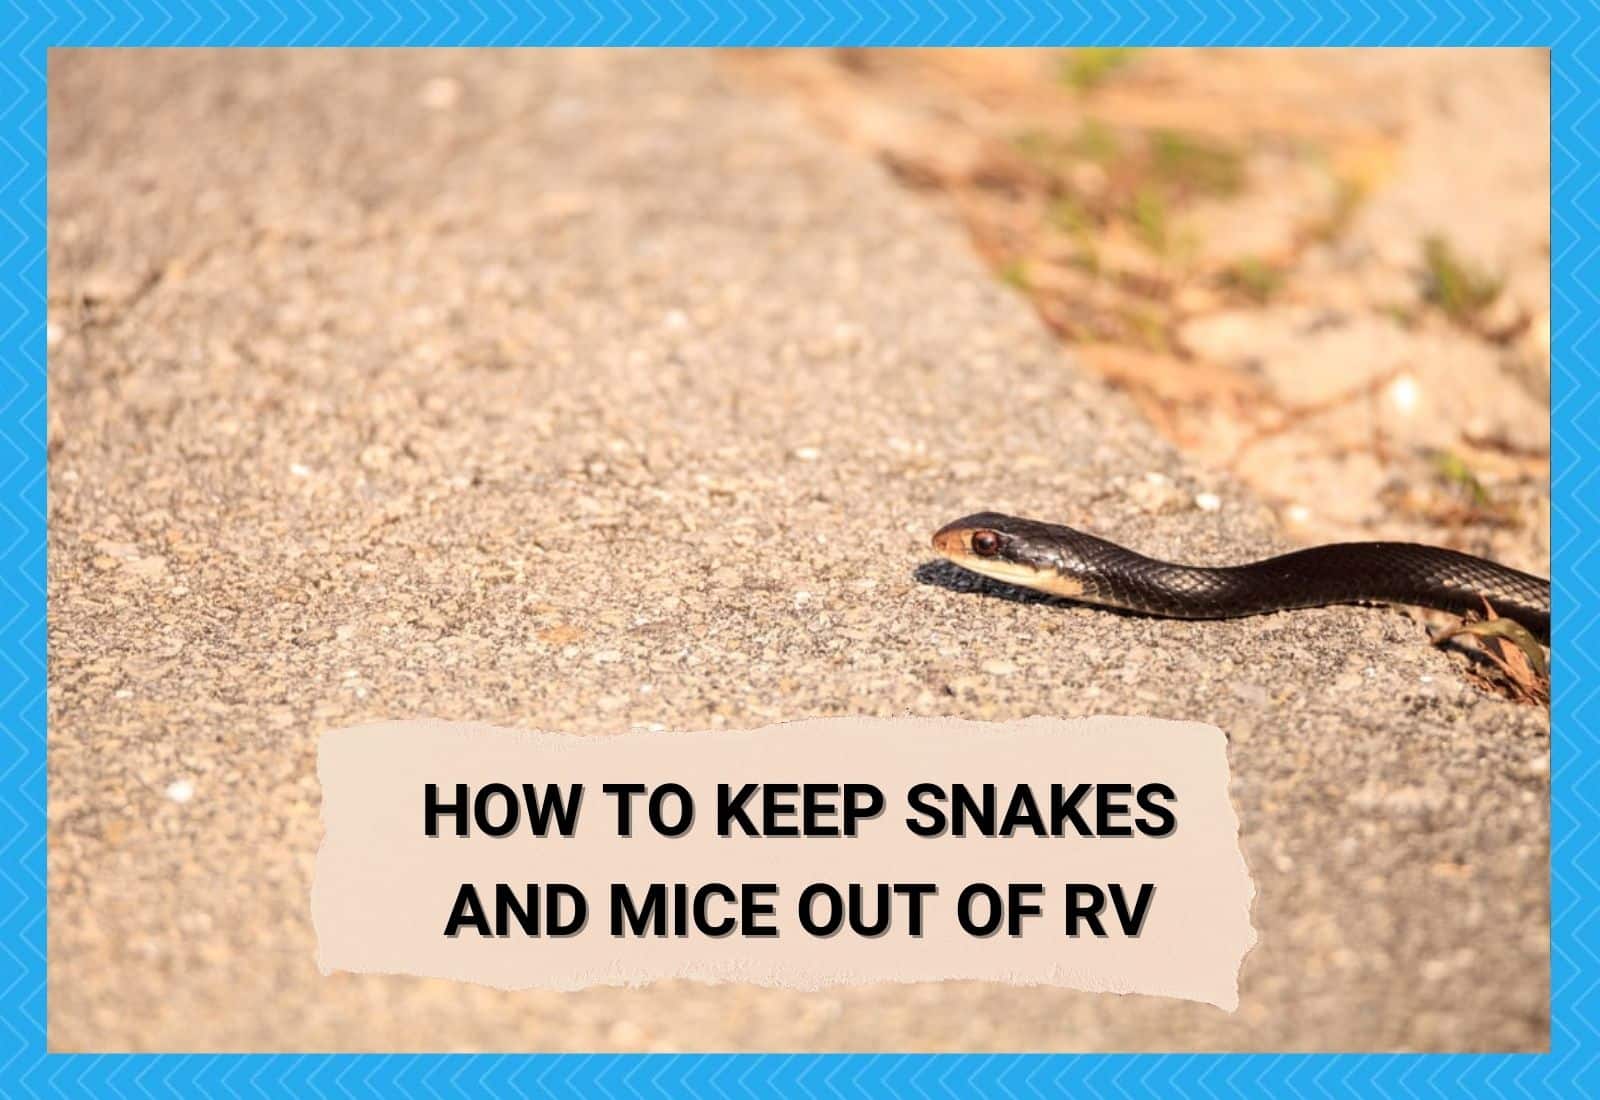 How To Keep Snakes And Mice Out Of RV